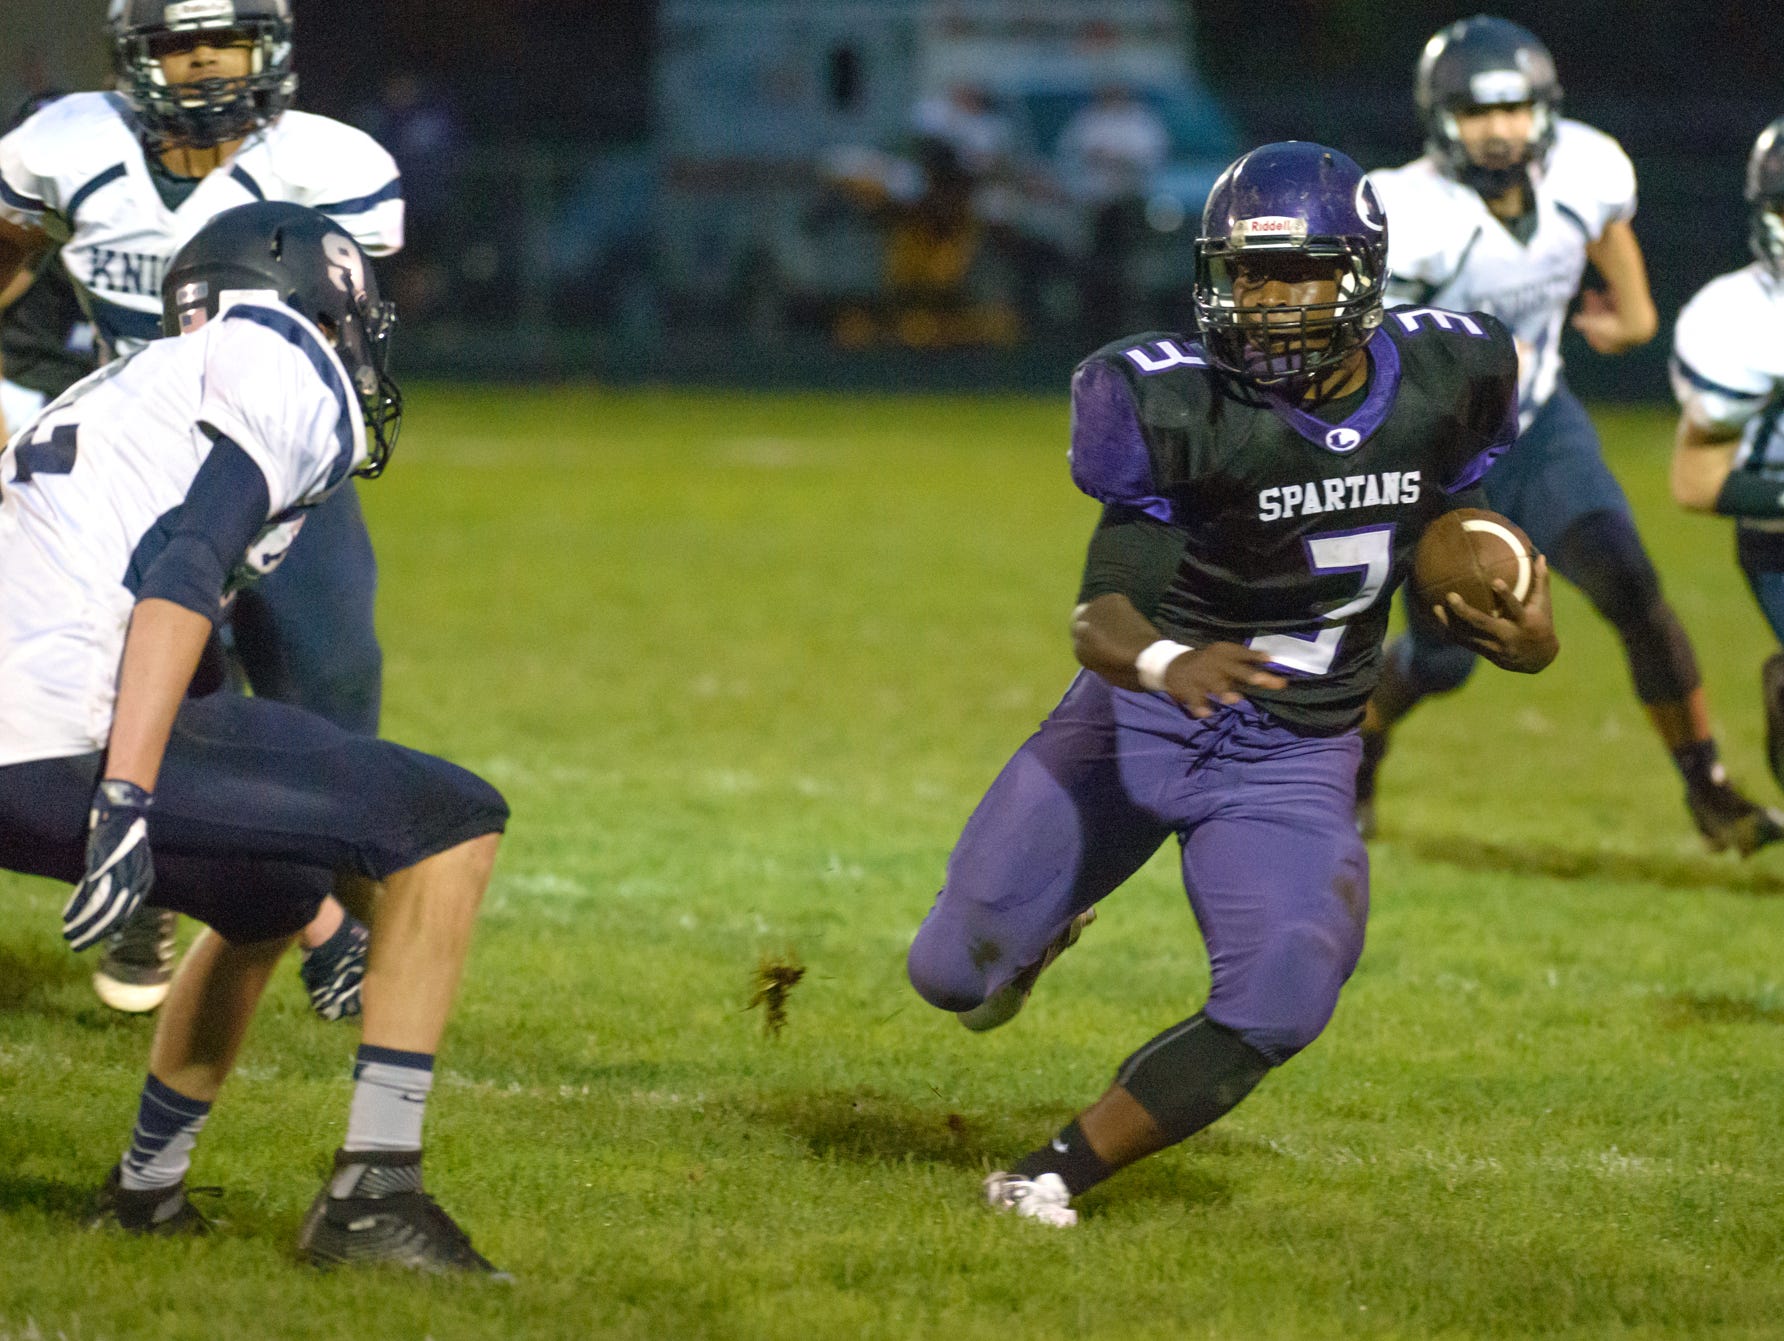 Lakeview running back Jay'Vion Settles had a near-school record of 258 yards on 16 carries earlier this season.